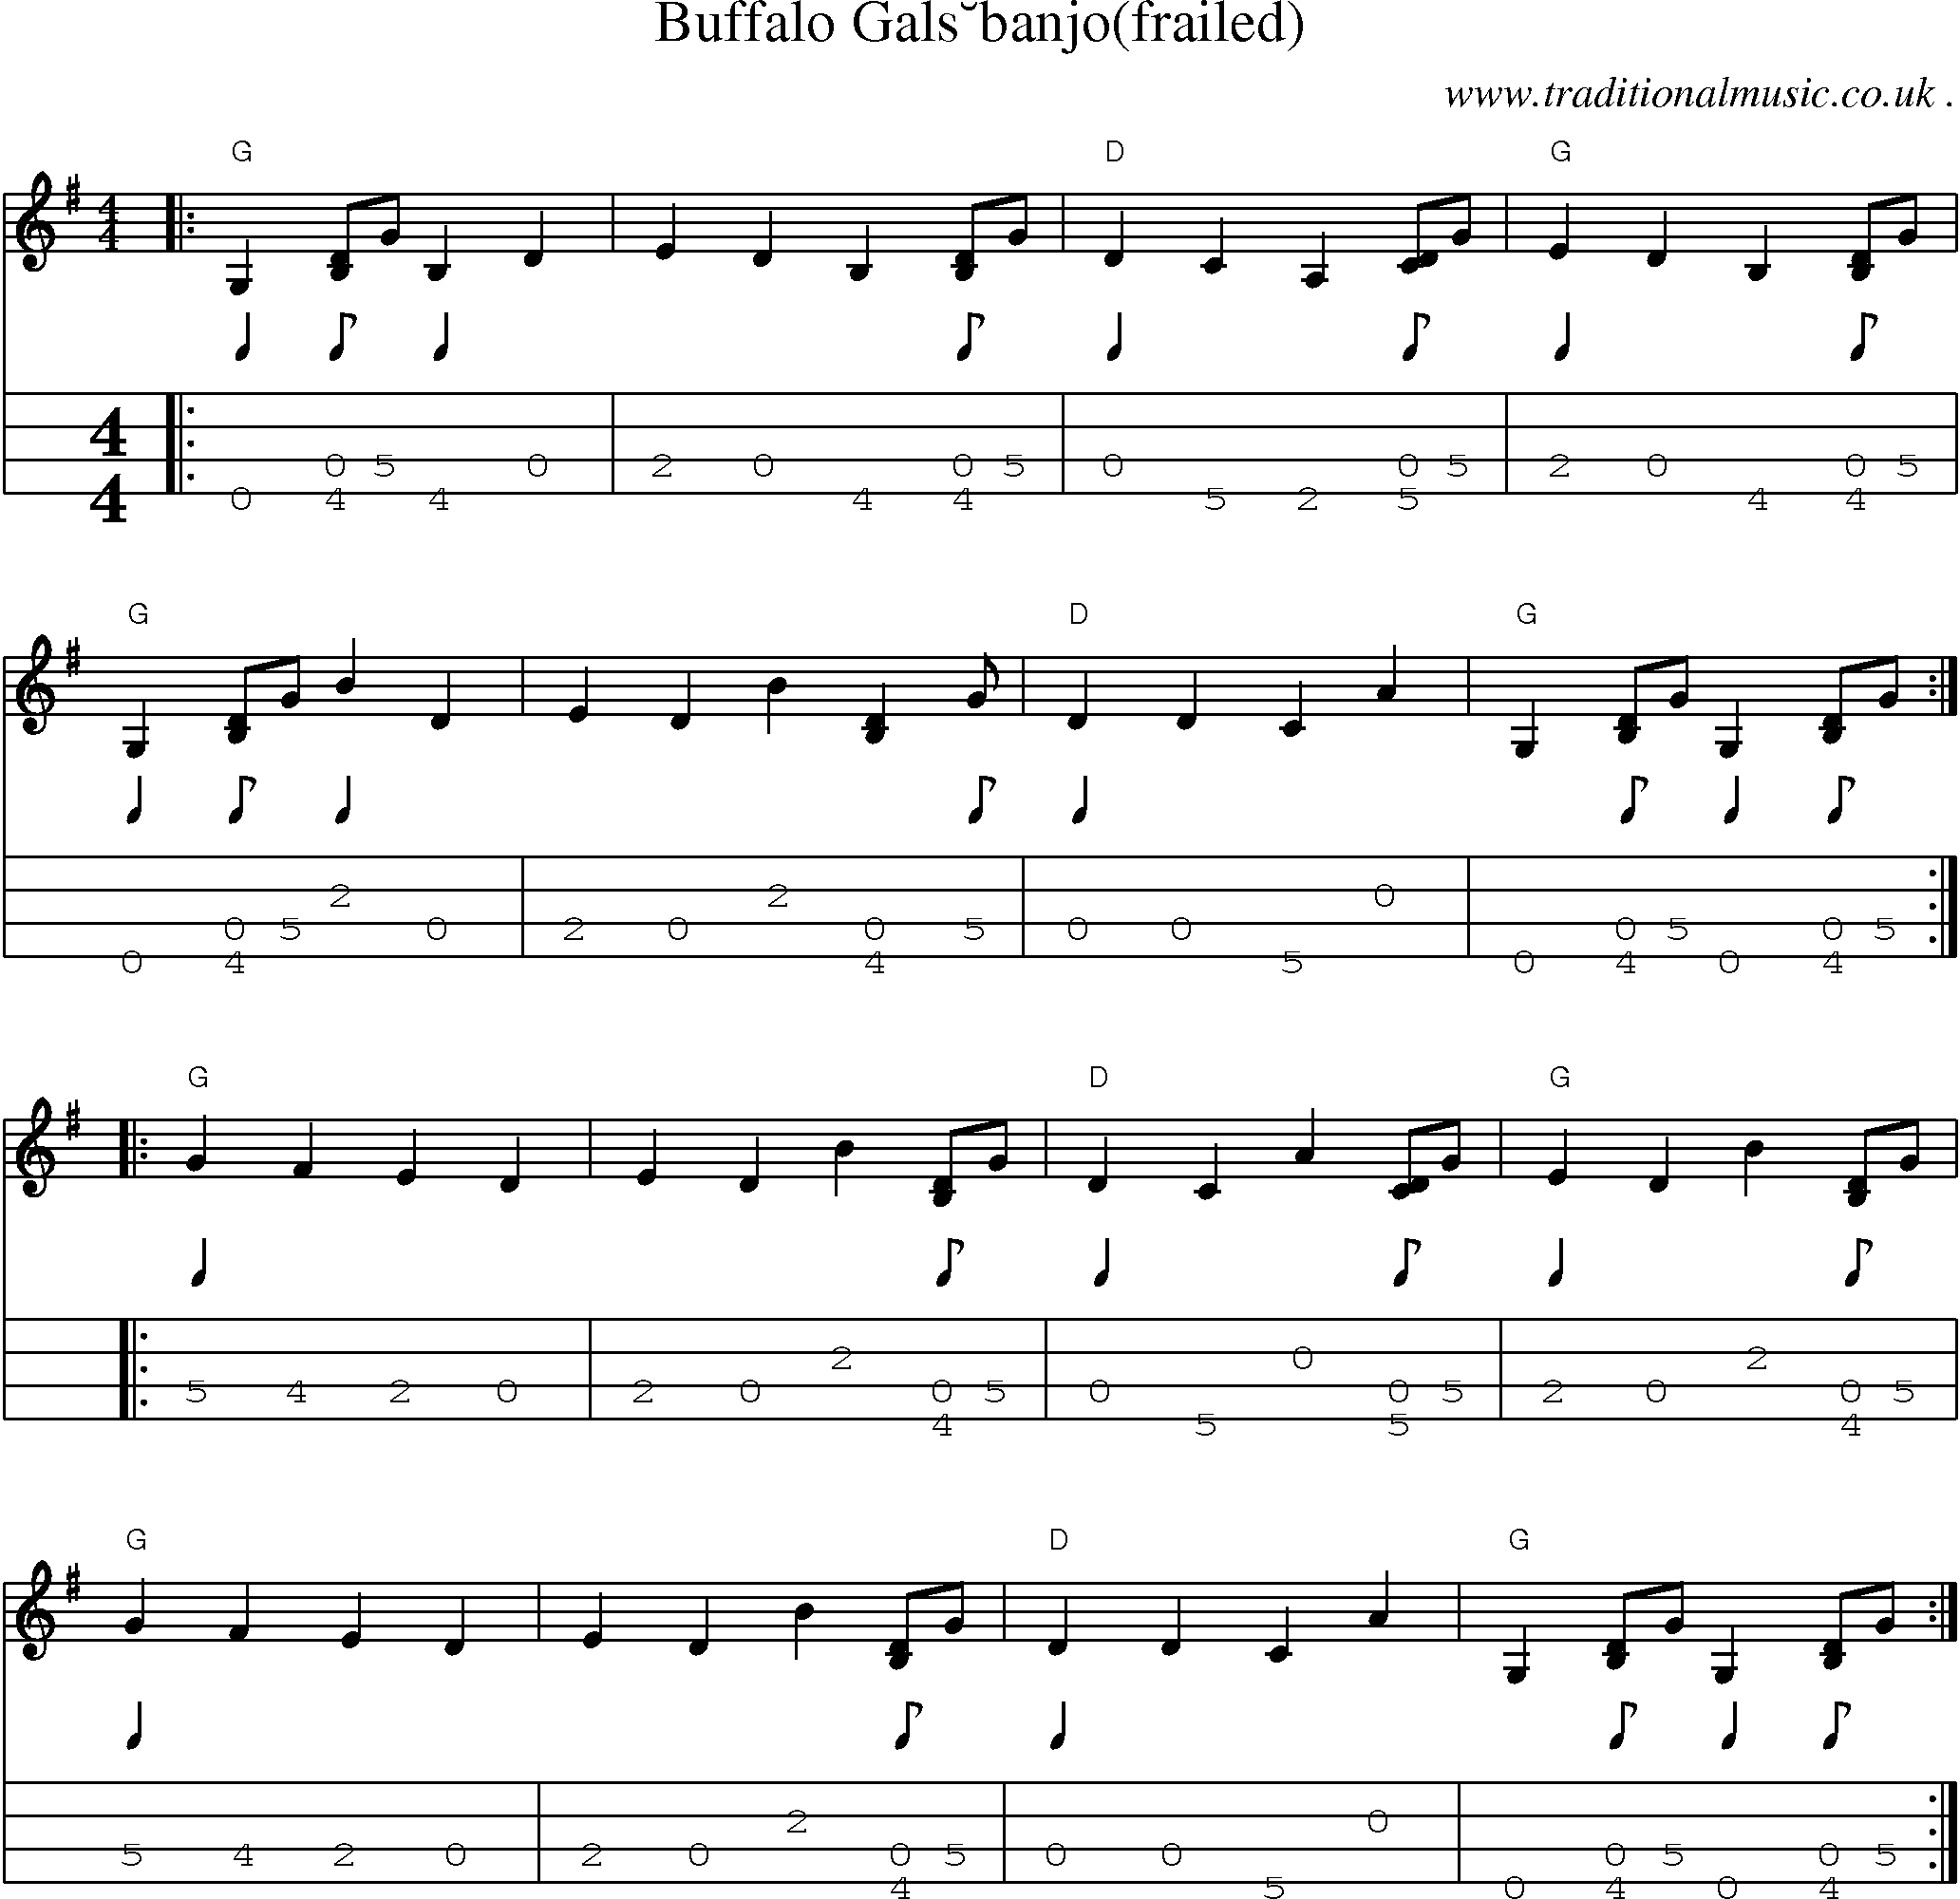 Music Score and Guitar Tabs for Buffalo Gals banjo fr